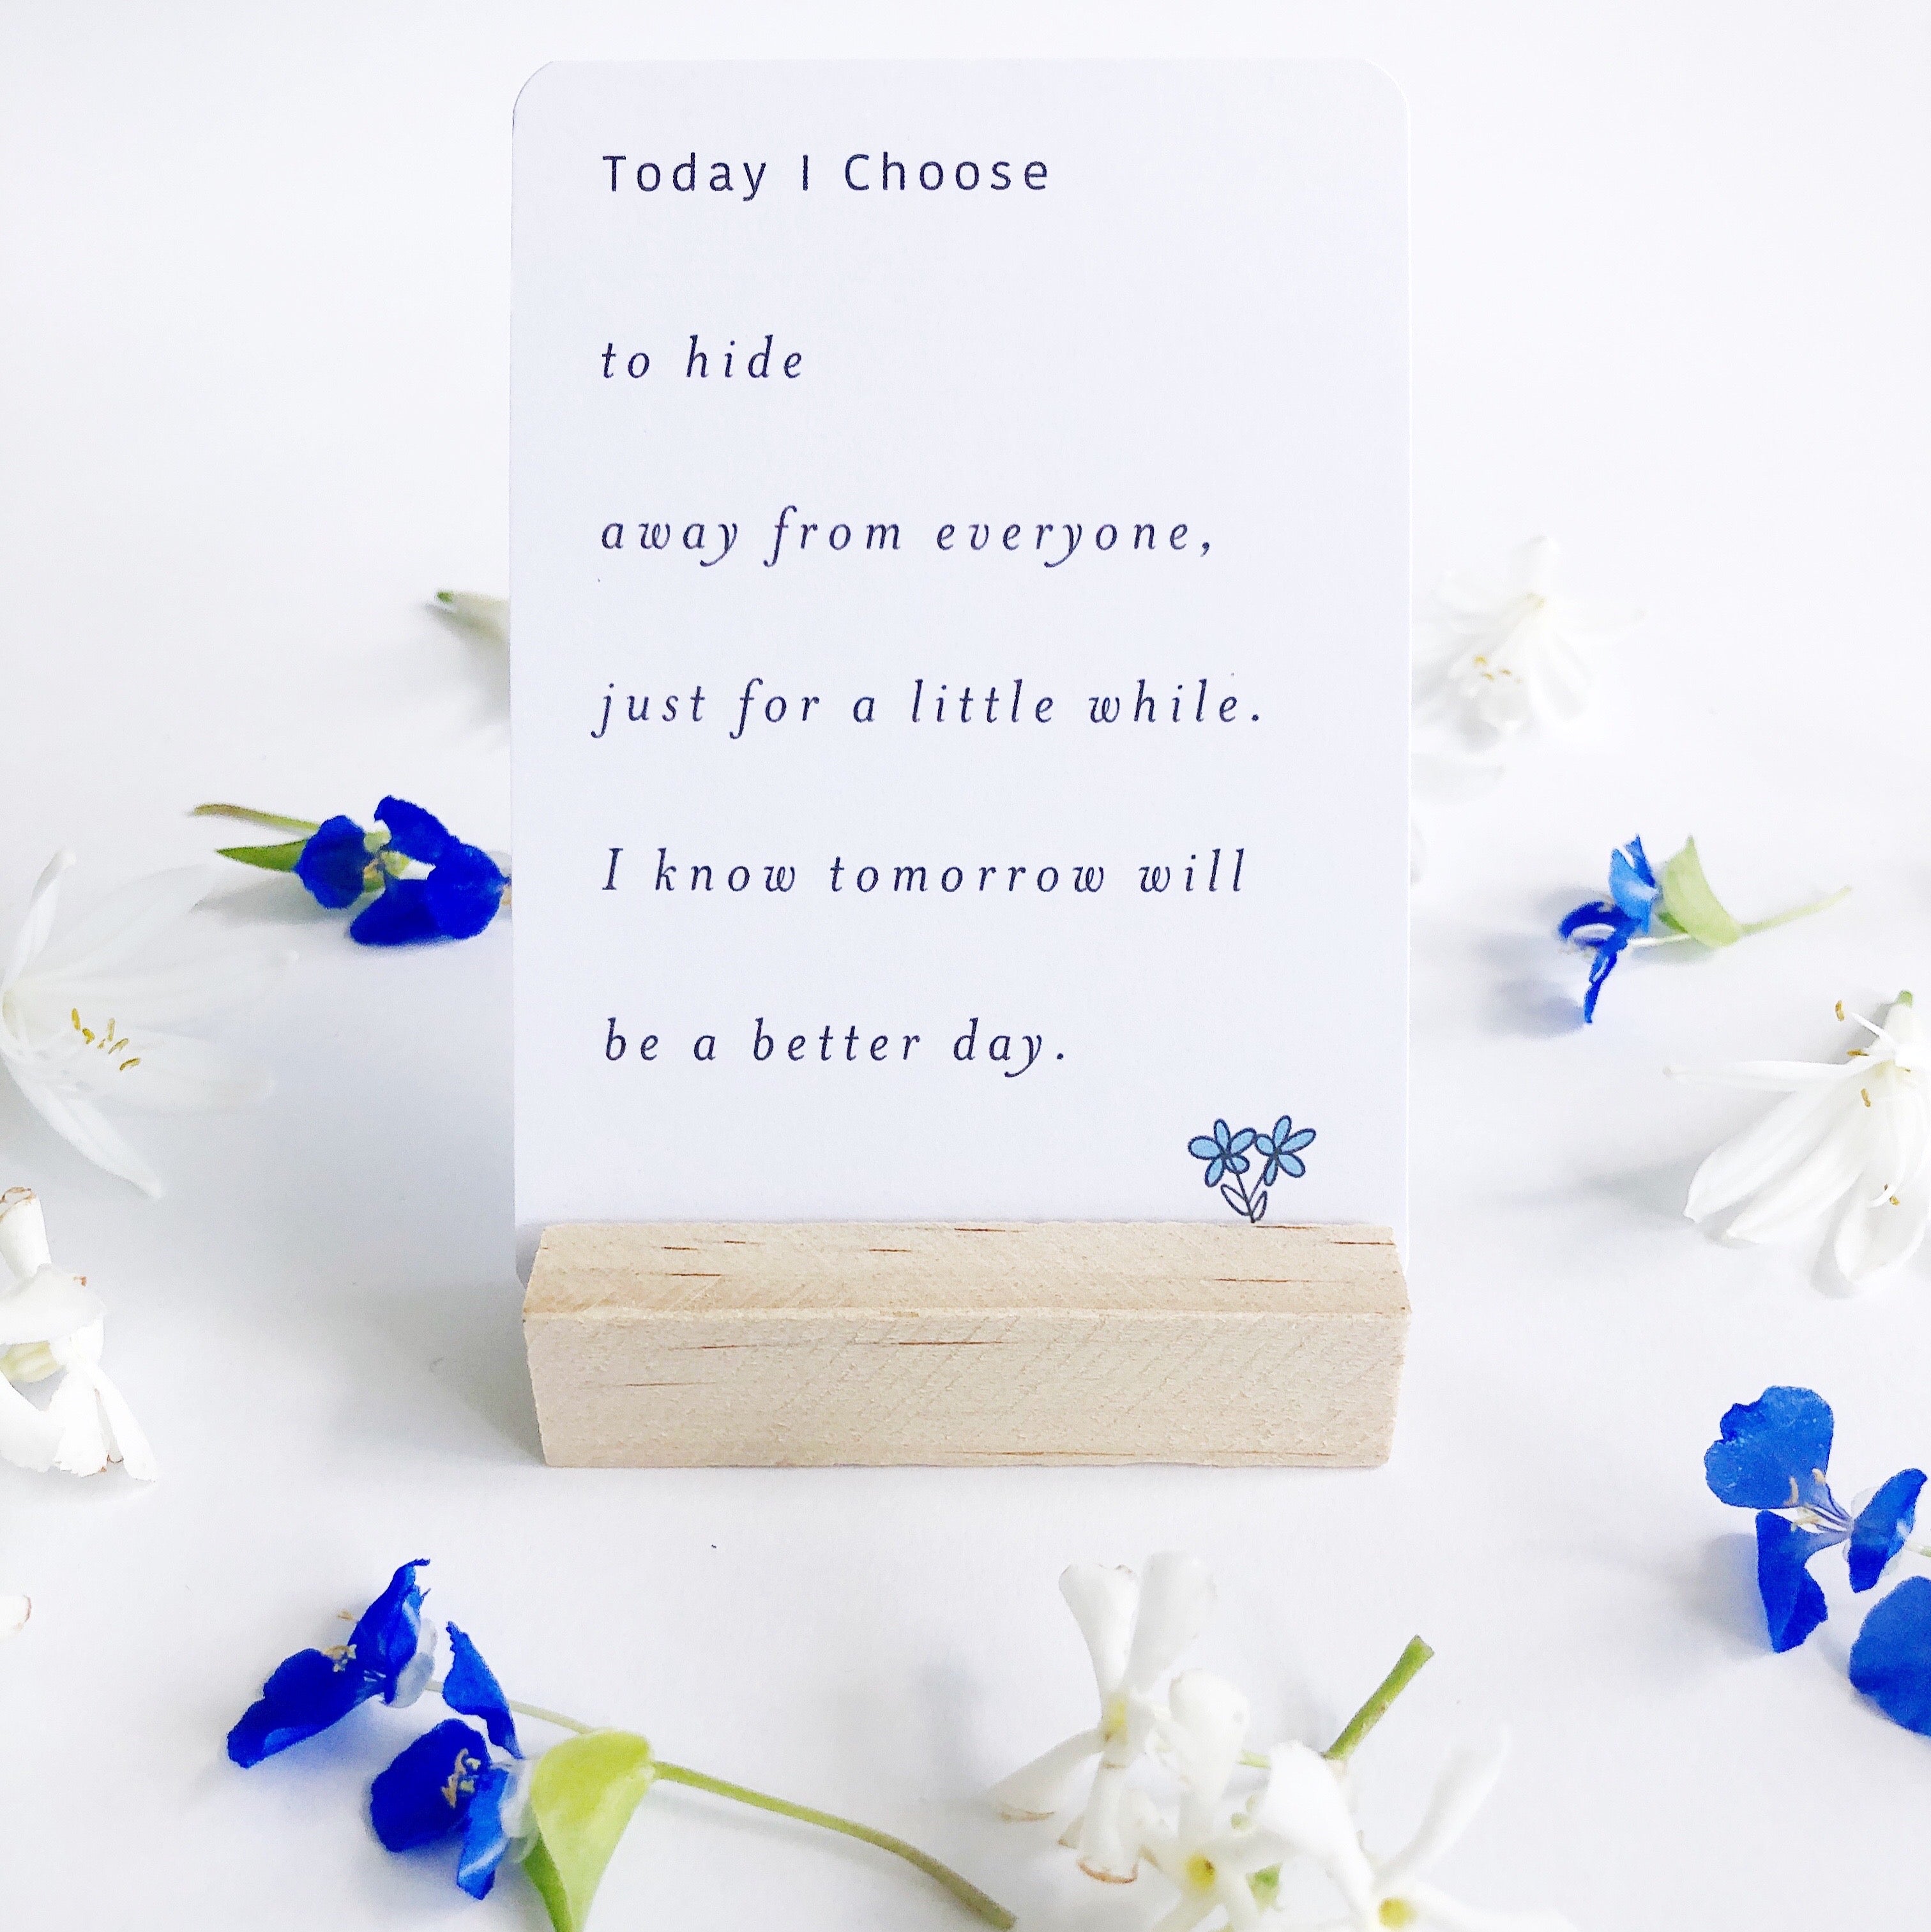 Memory Makers Today I Choose Edition Hide Away from Everyone Card